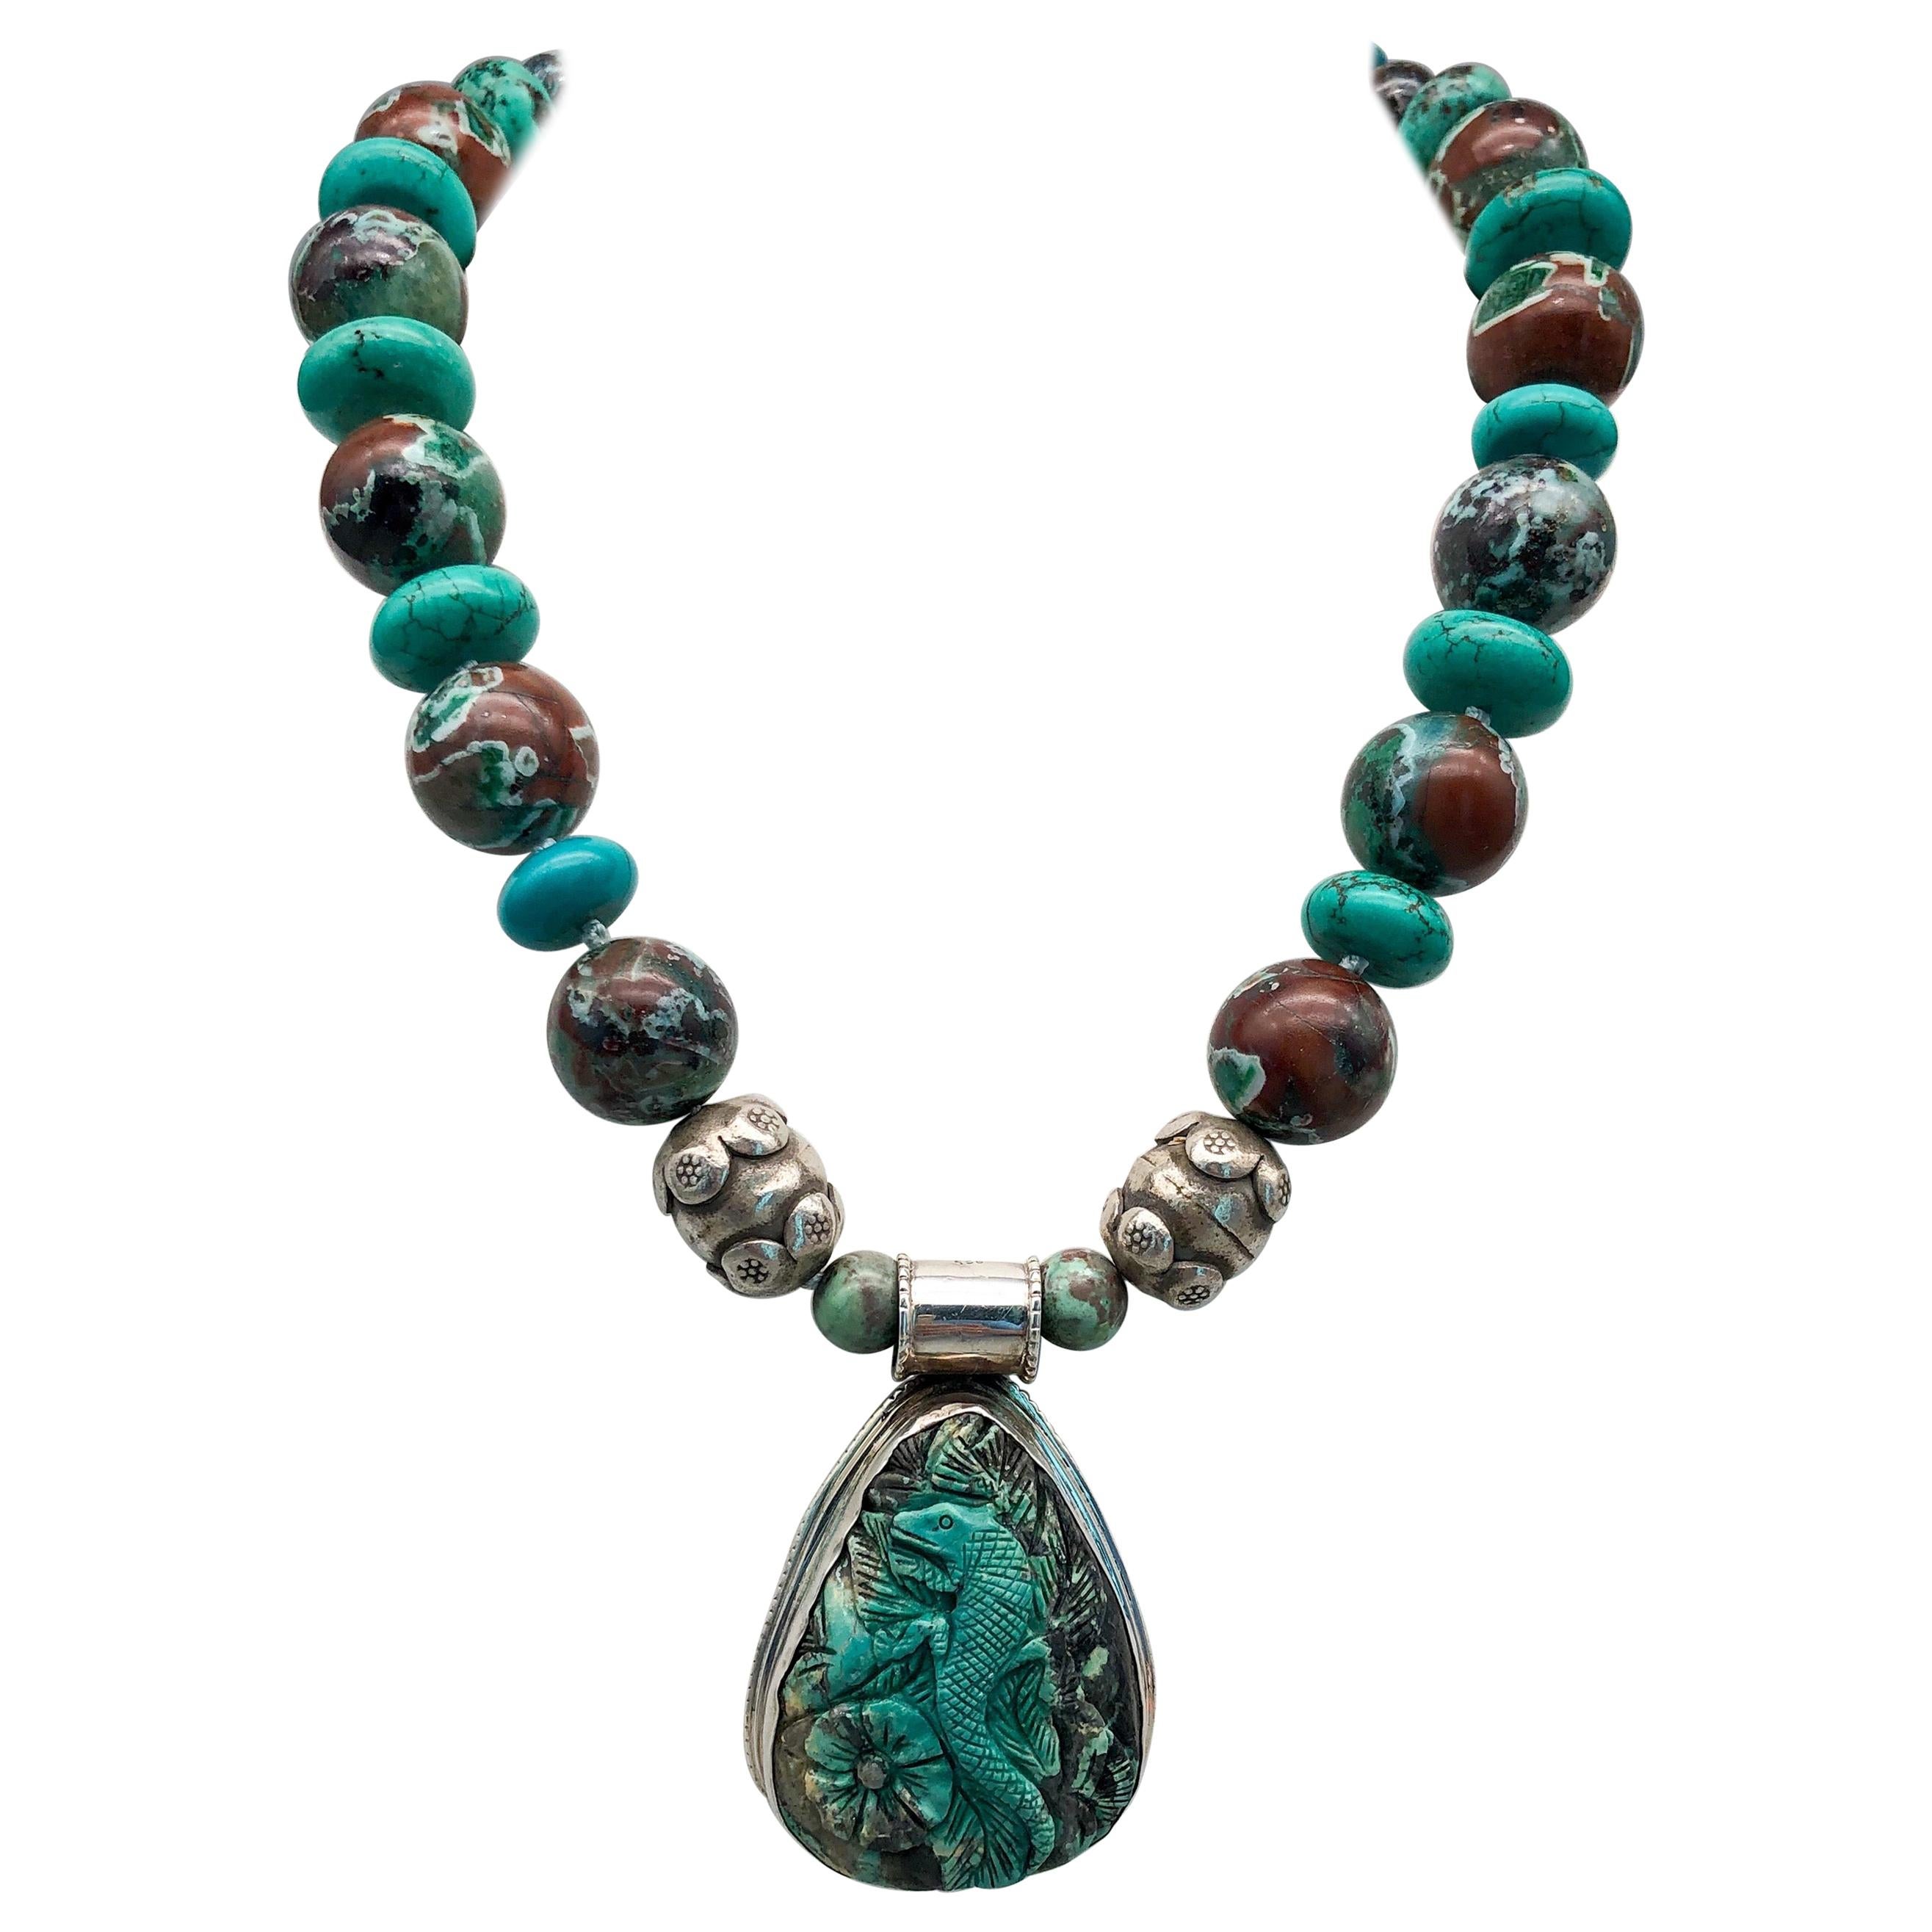 One-of-a-Kind

This interesting pendant of a lizard resting on a flower carved in China is just the beginning of this arresting combination of stones 18mm Lively patterned polished  Chrysocolla with an unusual amount of rich brown matrix alternates